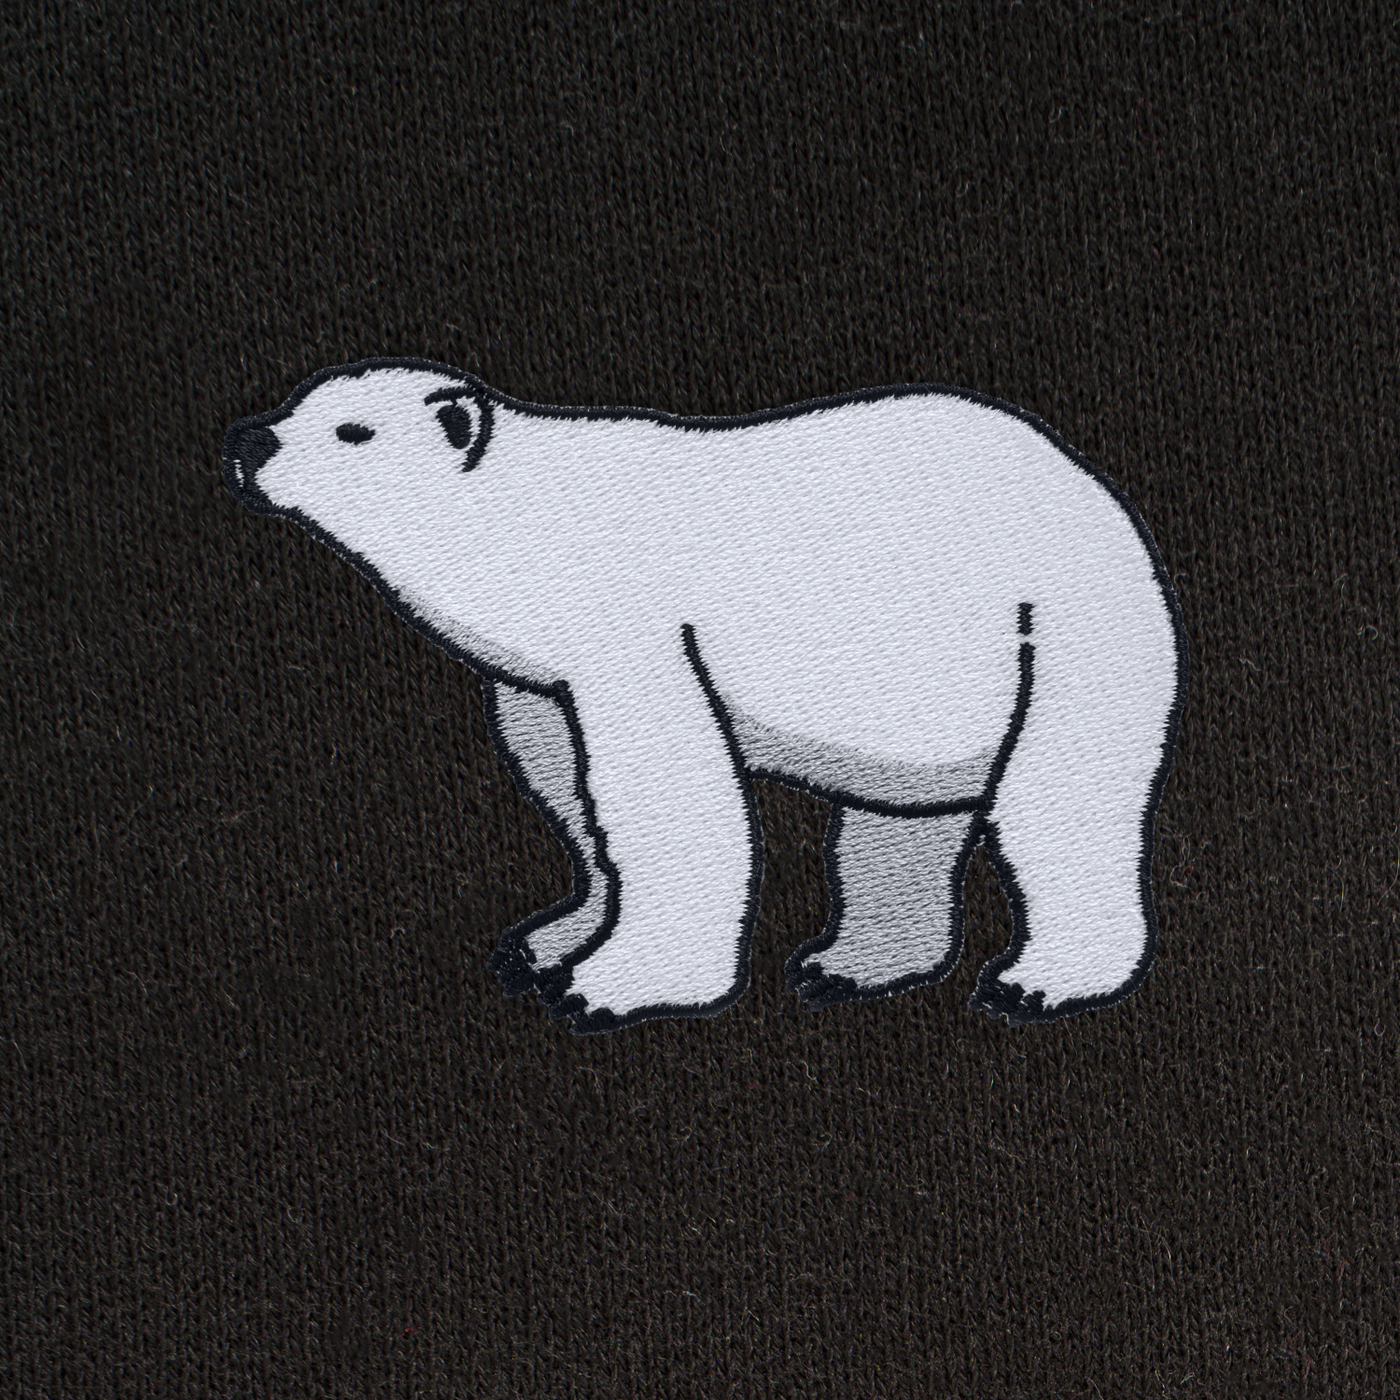 Bobby's Planet Men's Embroidered Polar Bear Shorts from Arctic Polar Animals Collection in Black Color#color_black